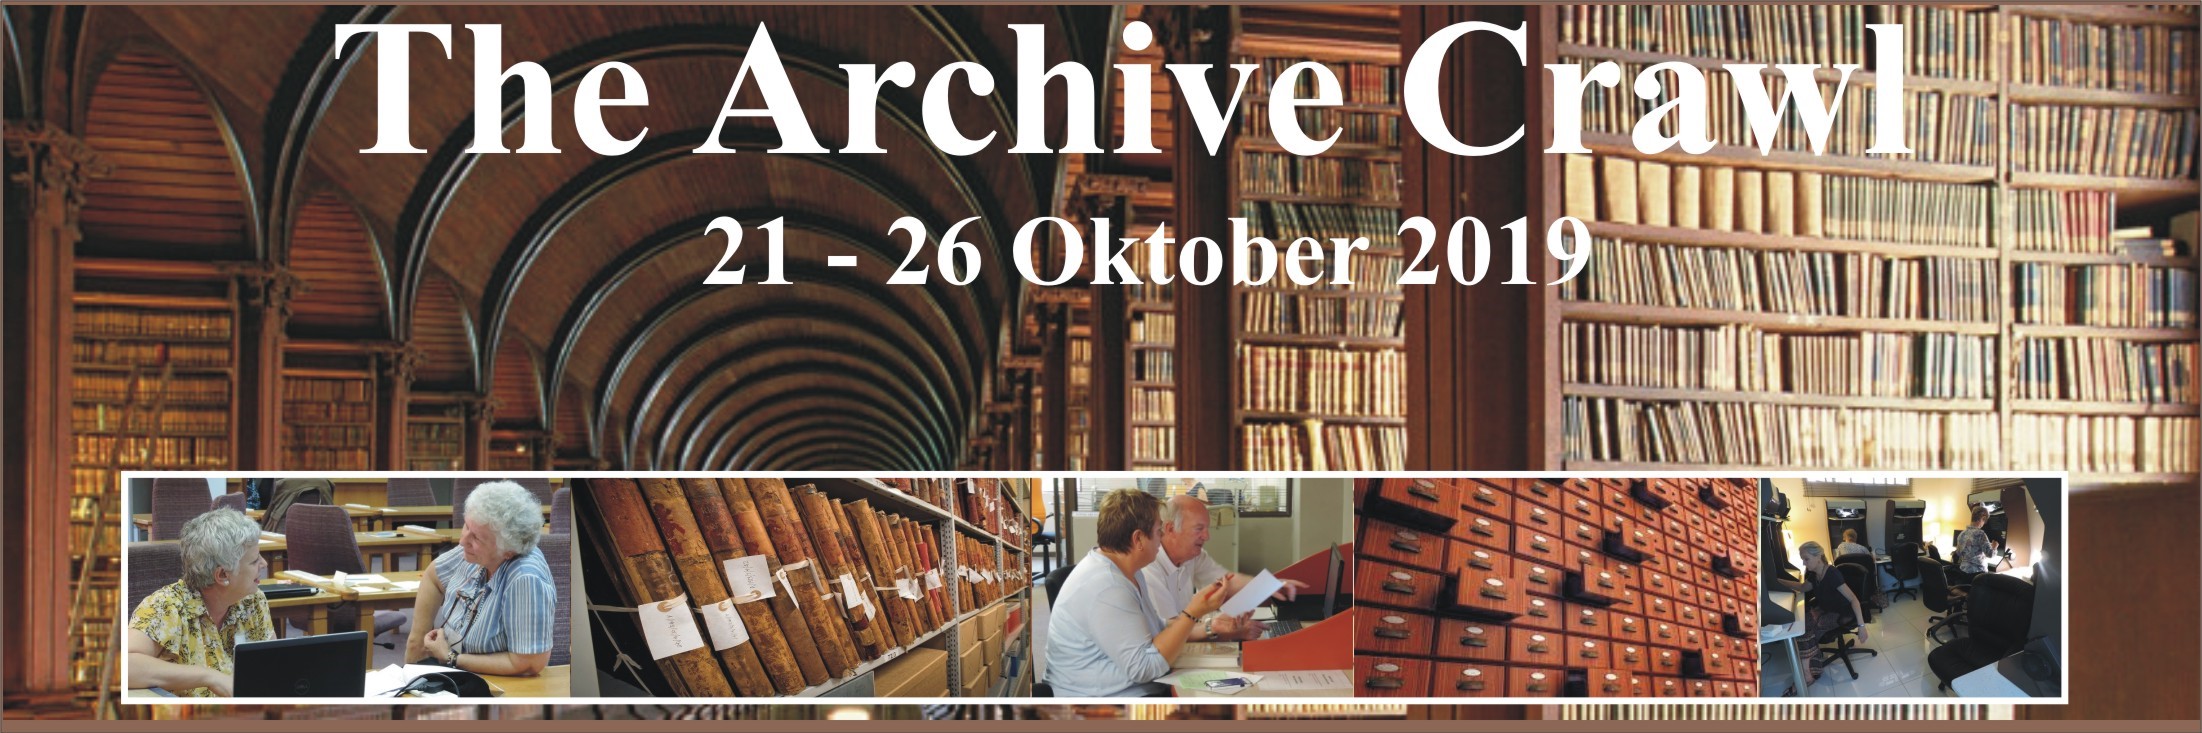 Archive Crawl AFR cropped